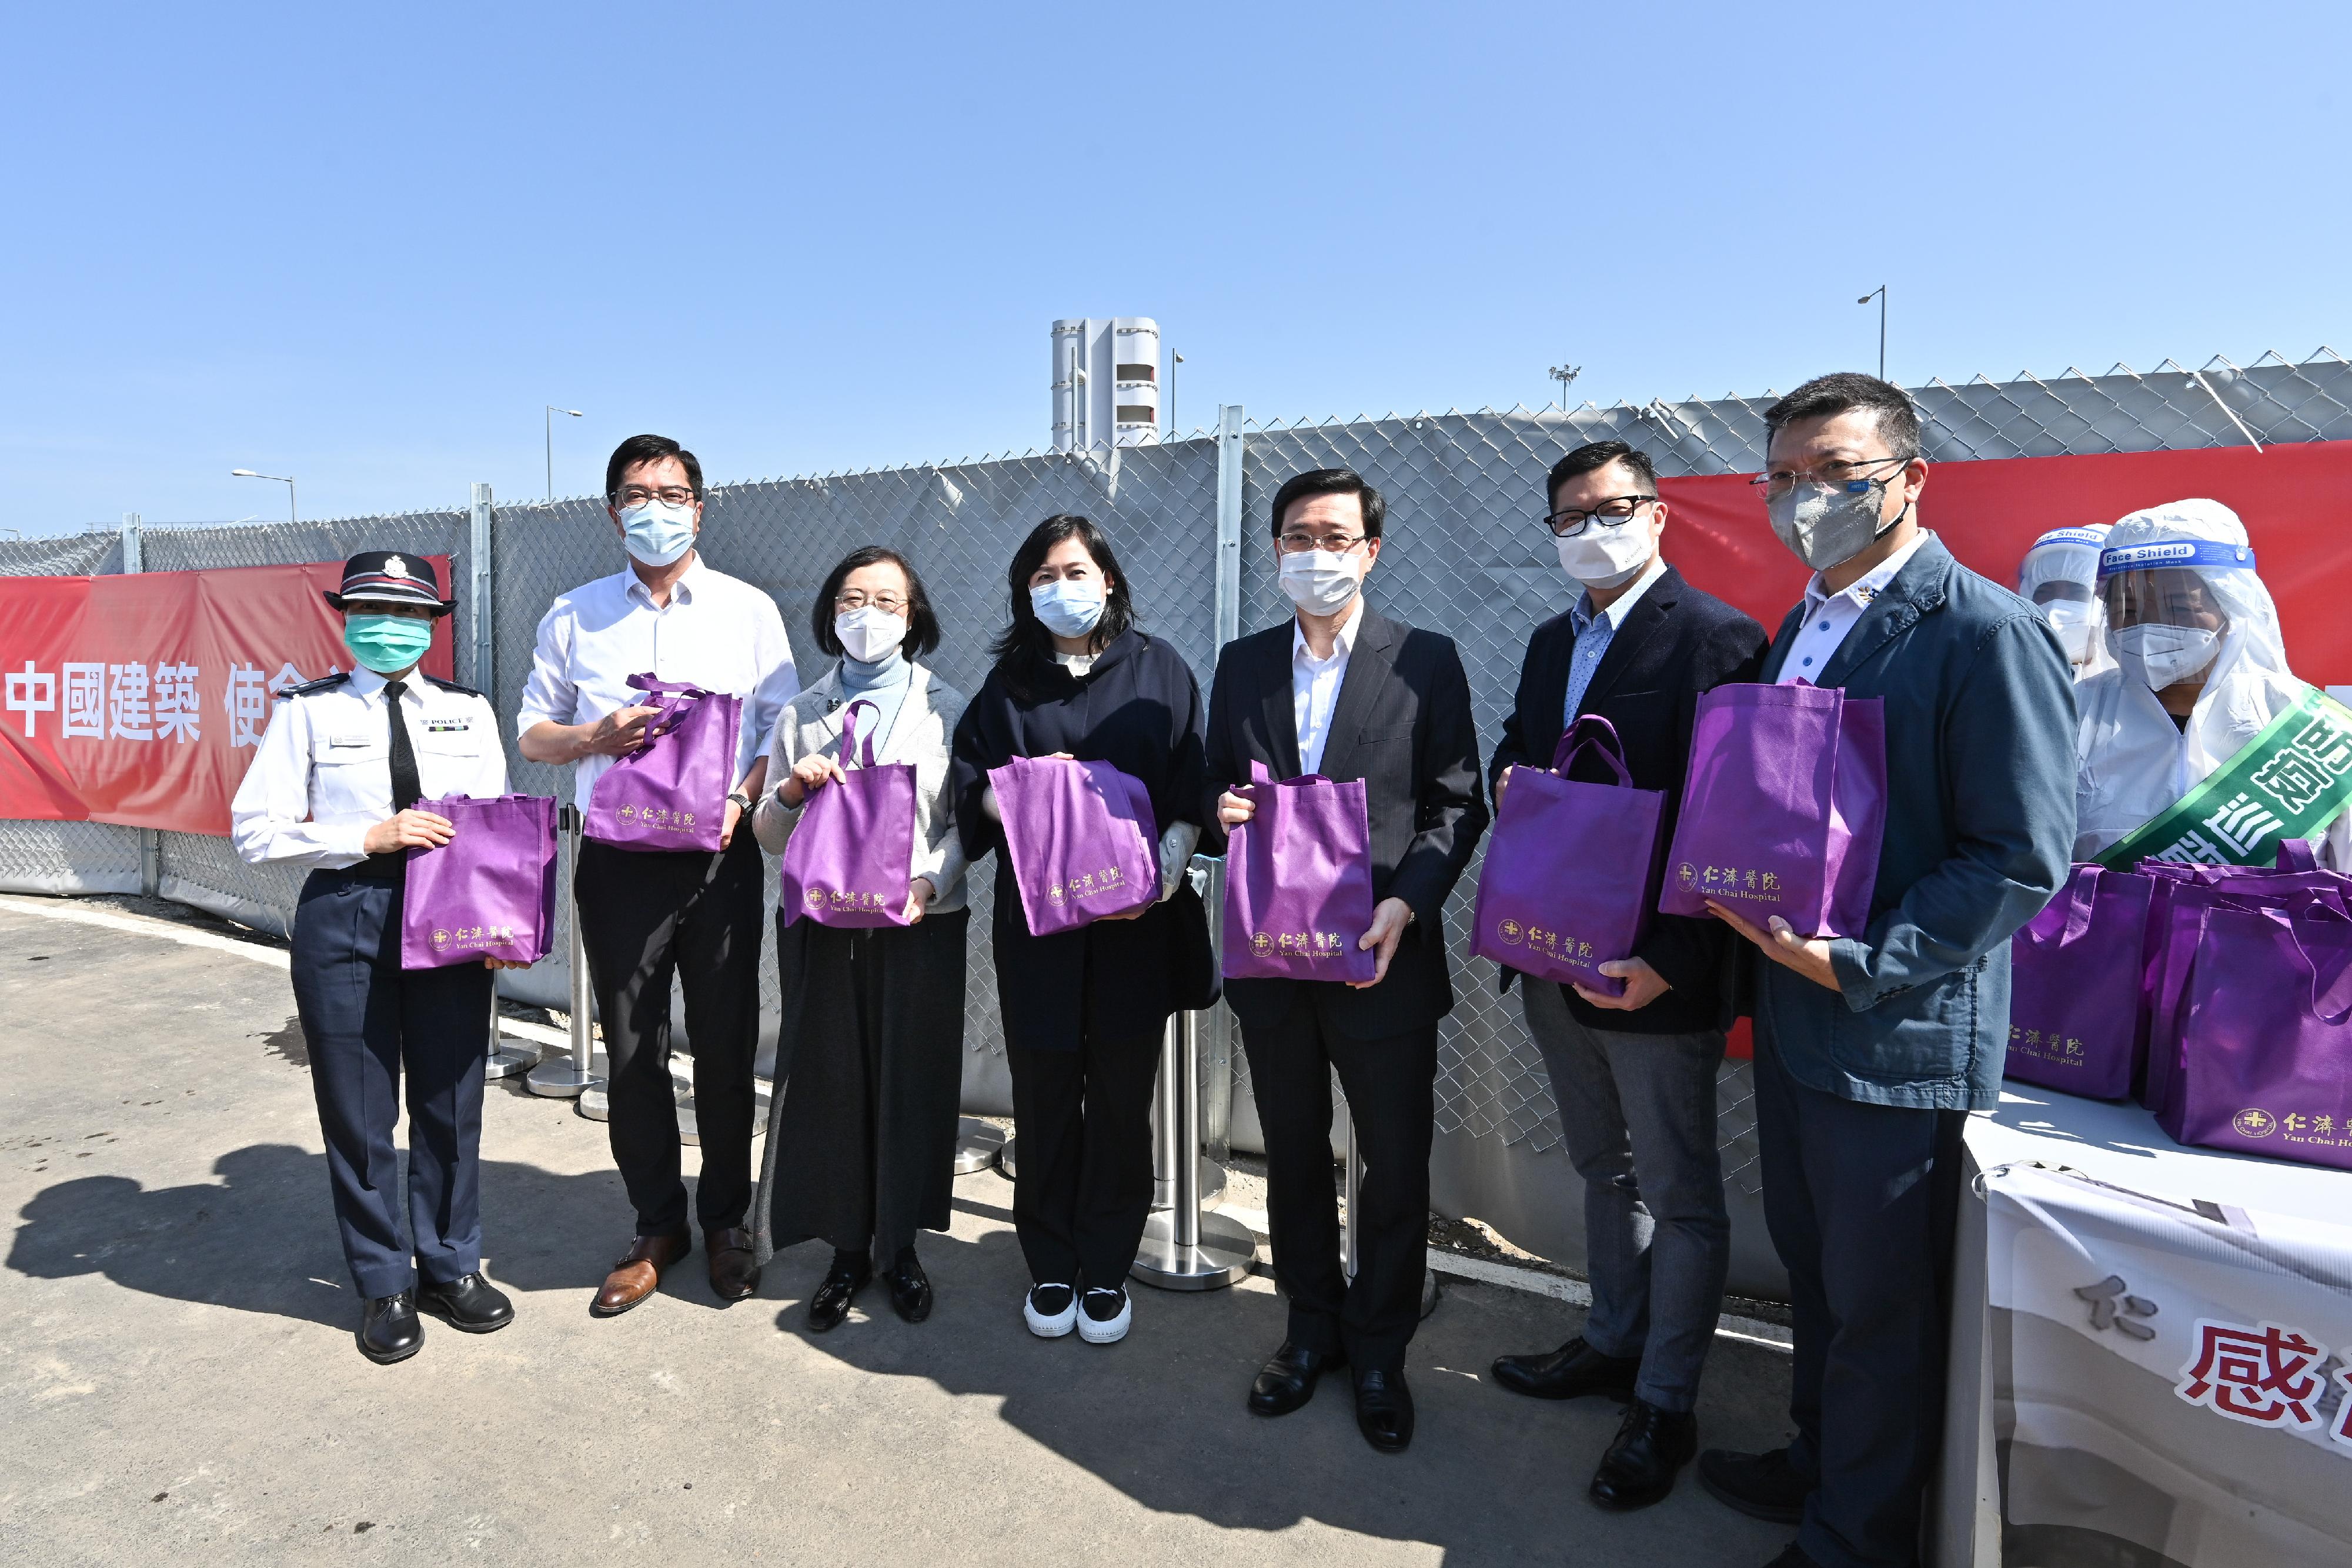 The Chief Secretary for Administration, Mr John Lee, this morning (March 12) visited the third community isolation facility constructed with Mainland support on the Hong Kong Boundary Crossing Facilities Island of the Hong Kong-Zhuhai-Macao Bridge. Photo shows Mr Lee (third right); the Chairman of the Board of Directors of Yan Chai Hospital, Ms Macy Wong (fourth right); the Secretary for Food and Health, Professor Sophia Chan (third left); the Secretary for Development, Mr Michael Wong (second left); and the Secretary for Security, Mr Tang Ping-keung (second right), holding anti-epidemic supplies kits donated by the Board of Directors of Yan Chai Hospital.